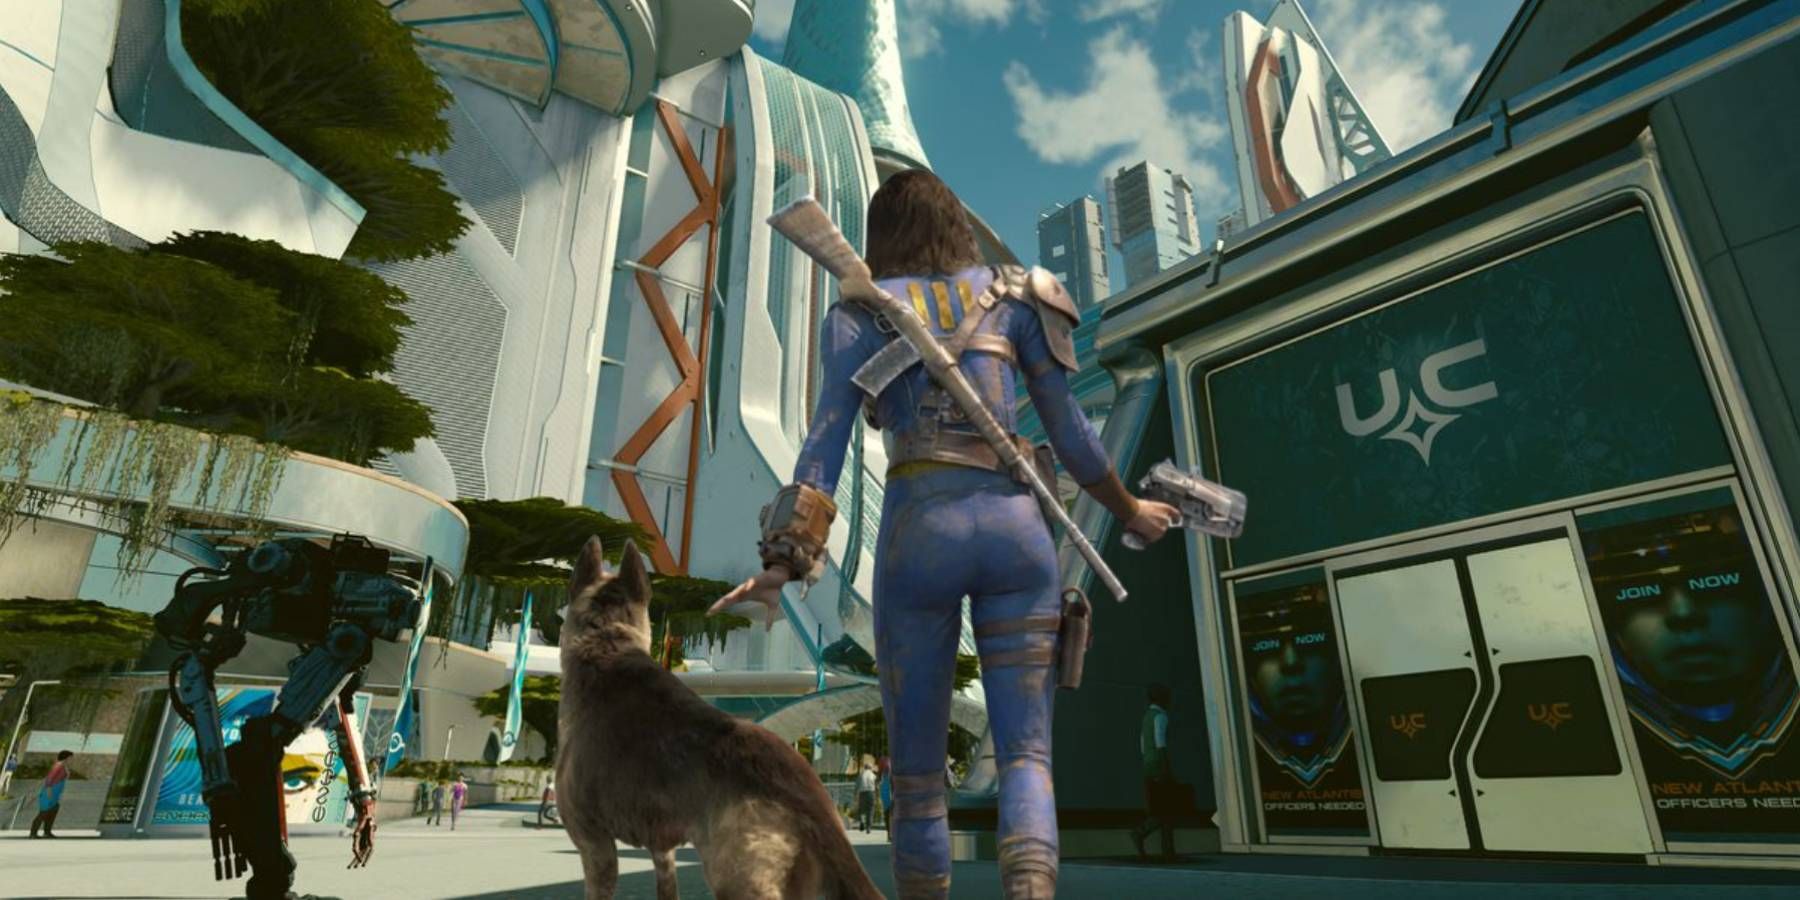 The Sole Survivor from Fallout 4 walking through Starfield's New Atlantis